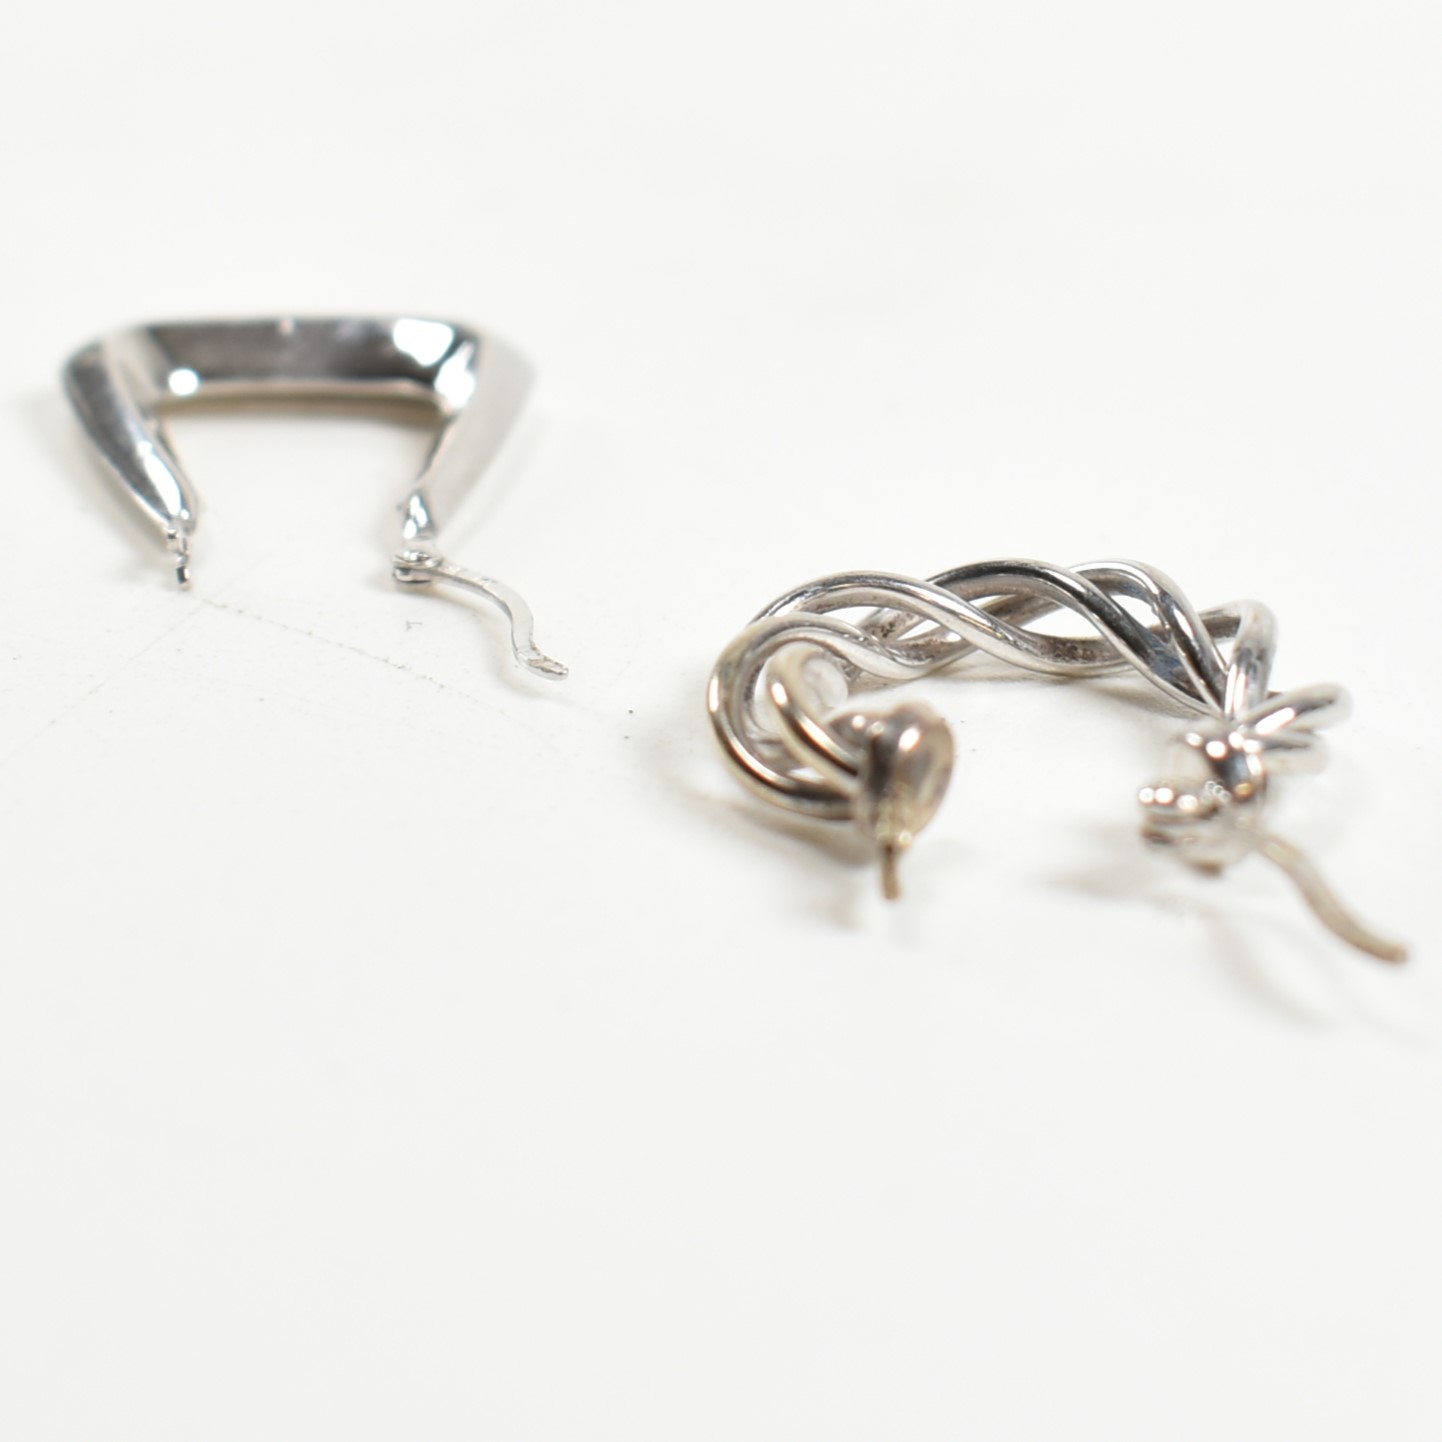 TWO PAIRS OF 9CT WHITE GOLD HOOP EARRINGS - Image 6 of 6